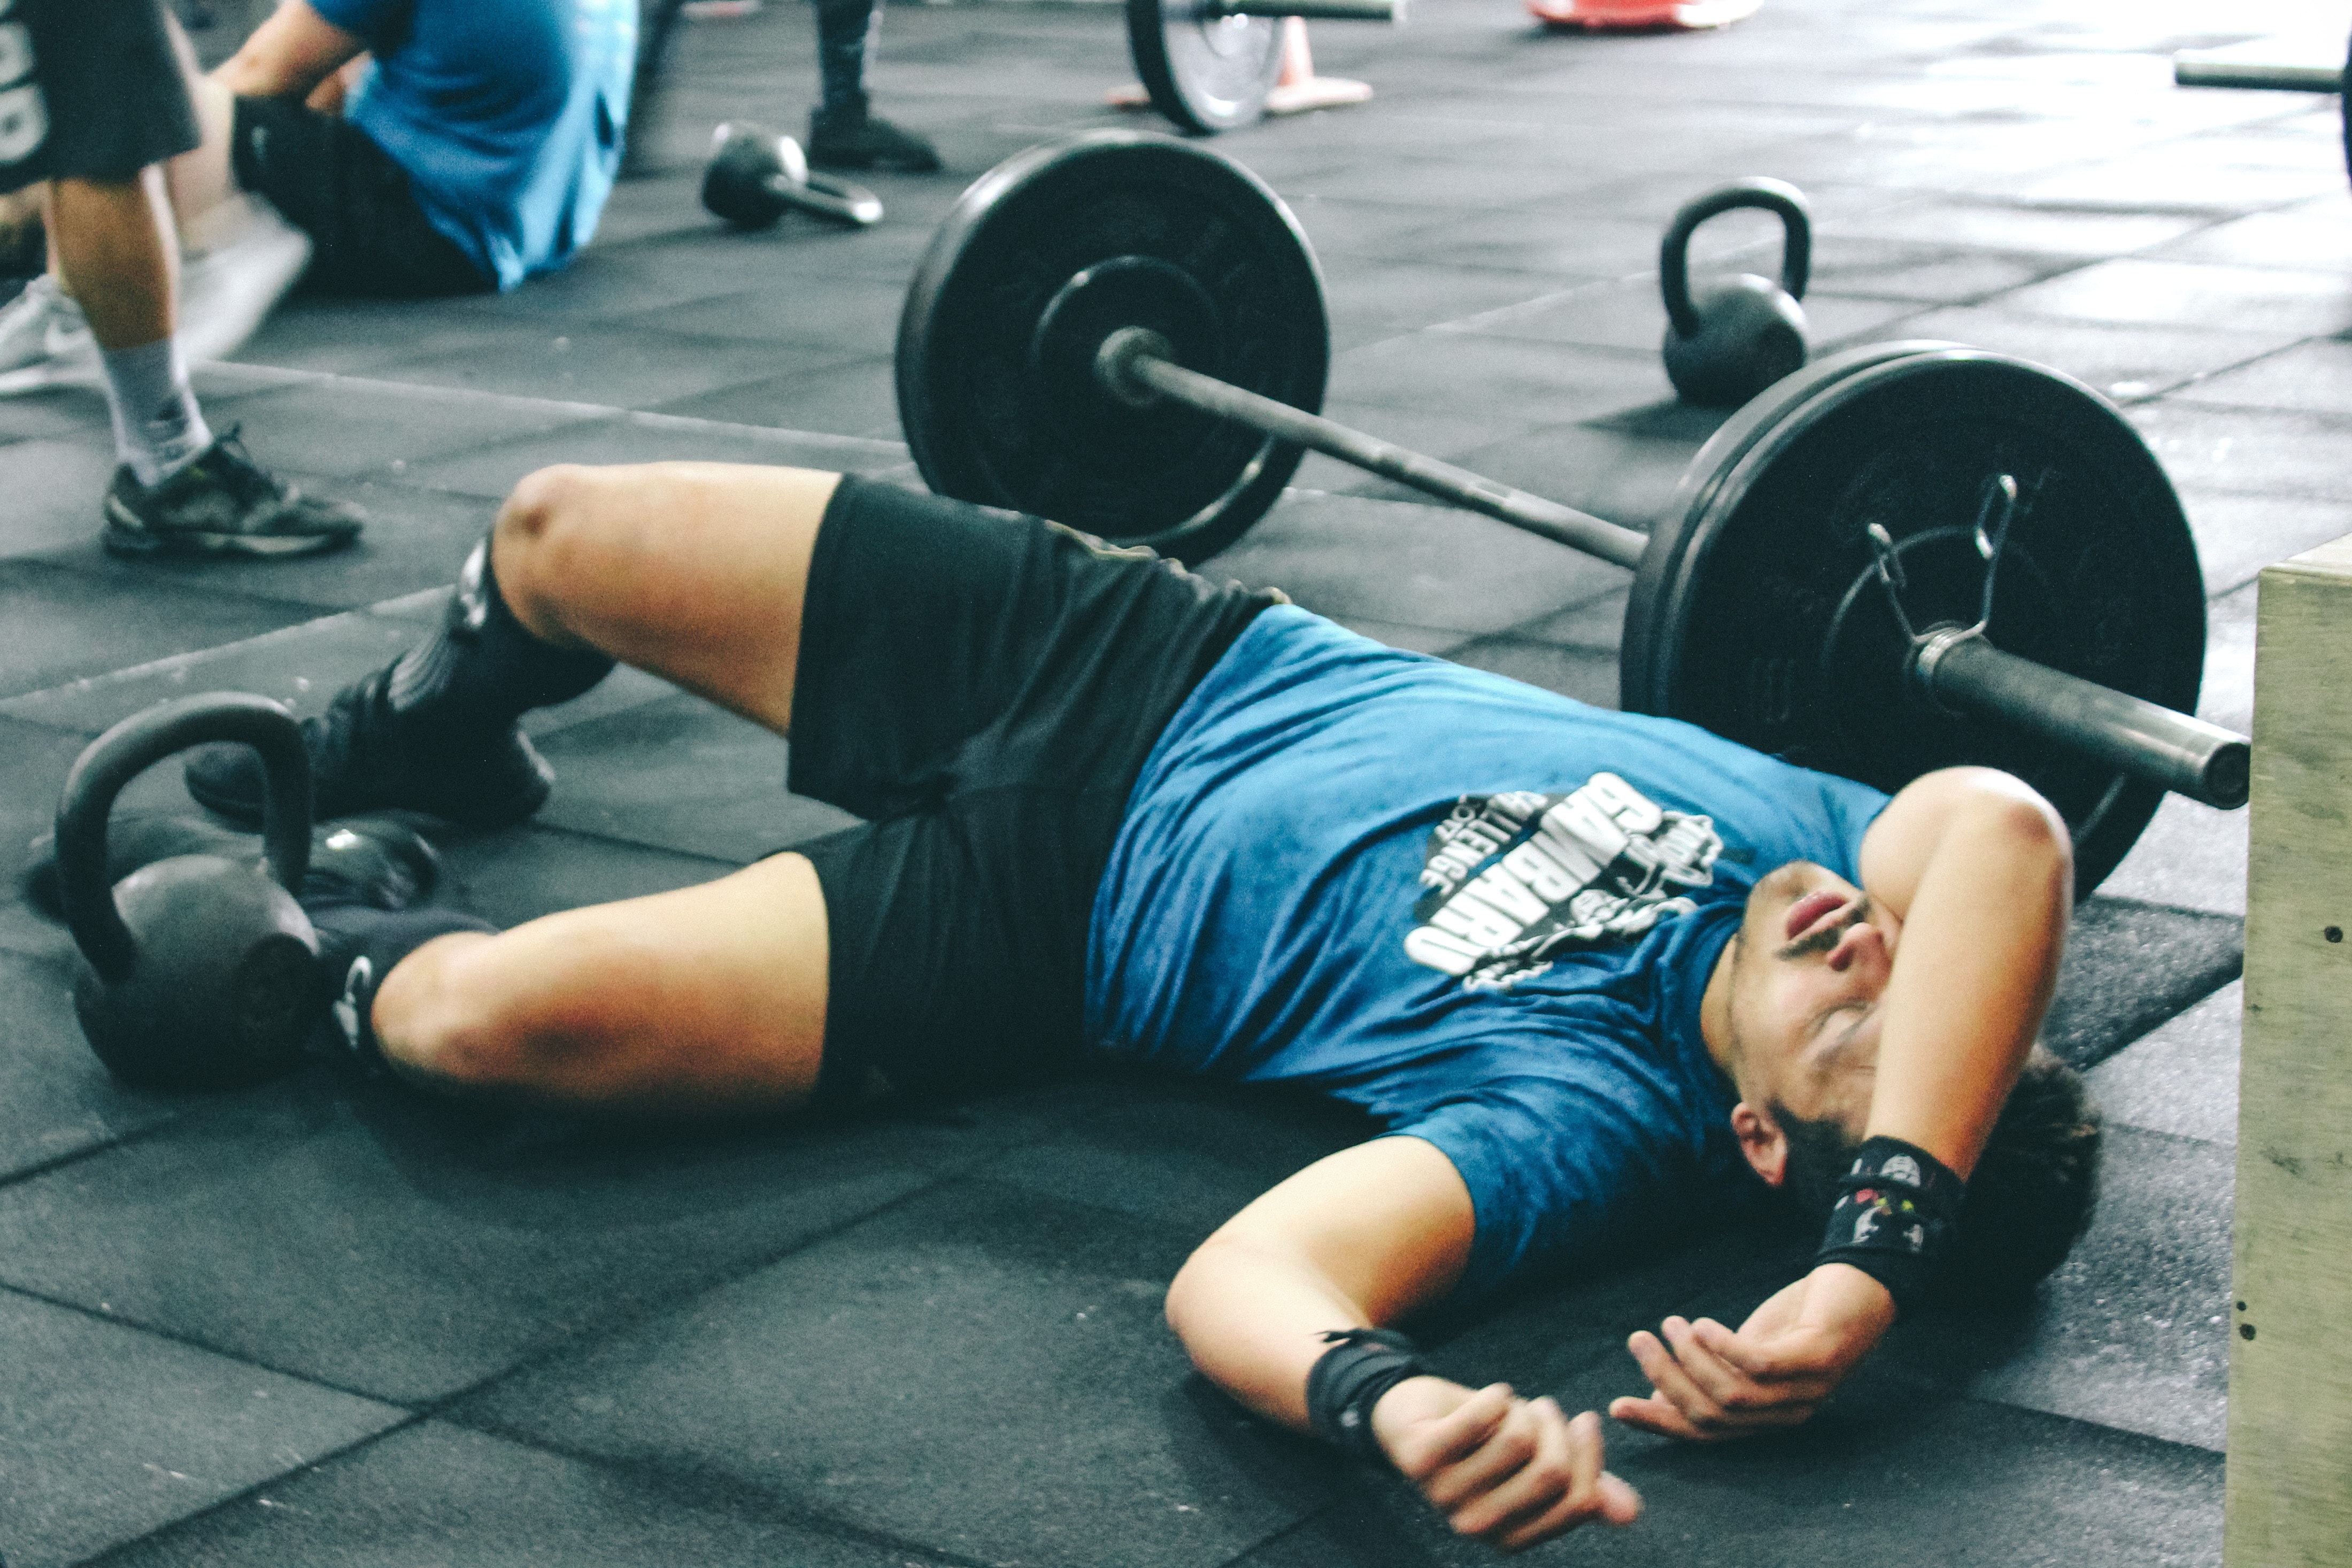 Man Lying on Rubber Mat Near Barbell Inside the Gym, Activity, Male, Weights, Weightlifting, HQ Photo